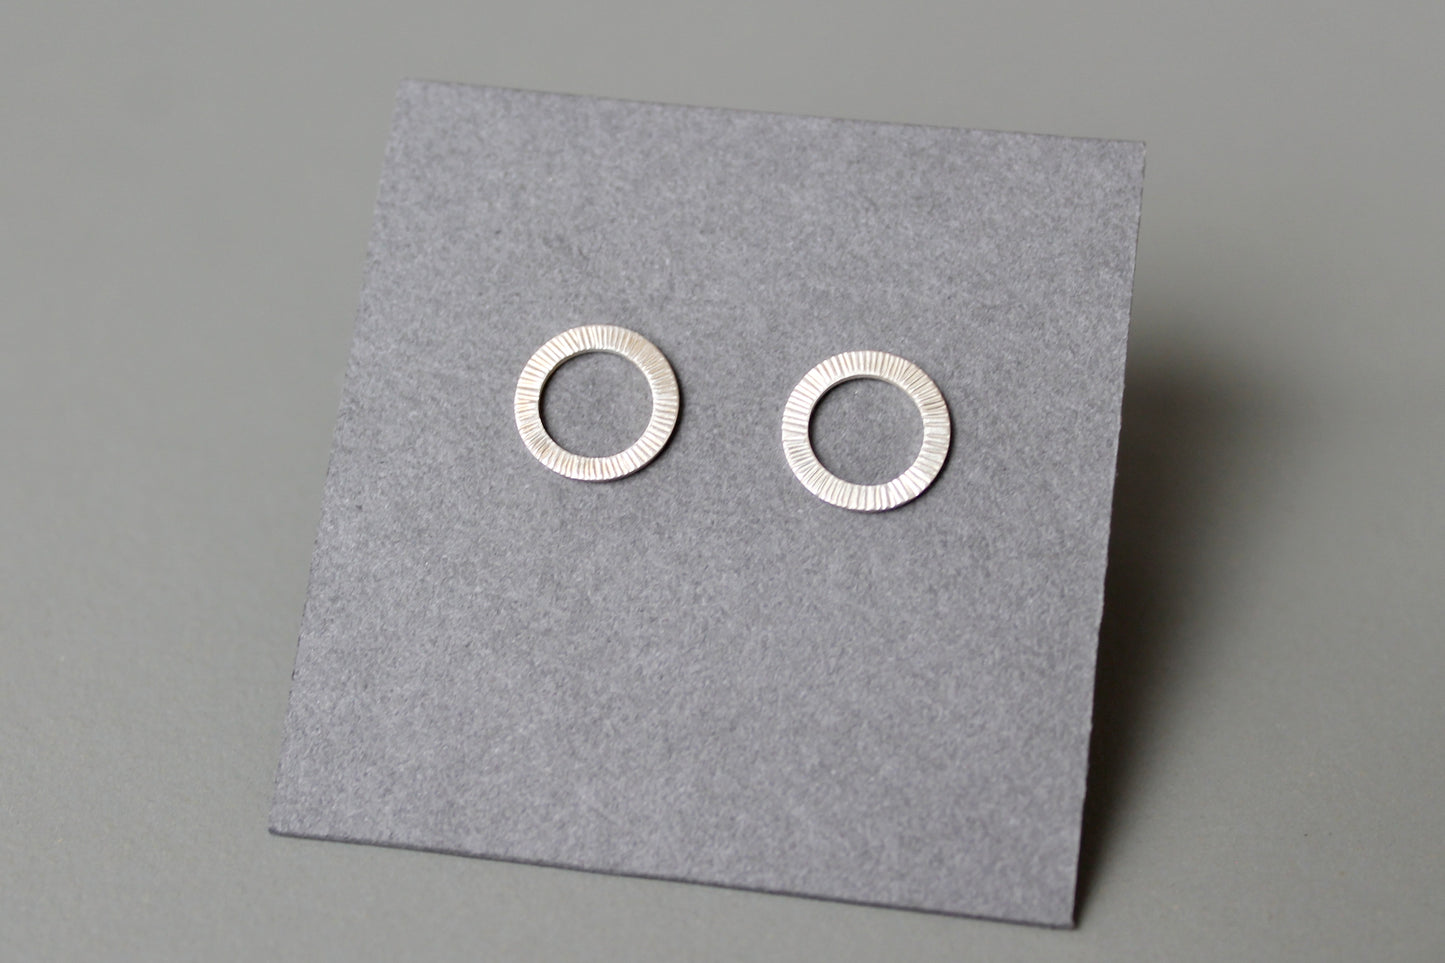 Beautiful ear studs sterling silver with hammered surface